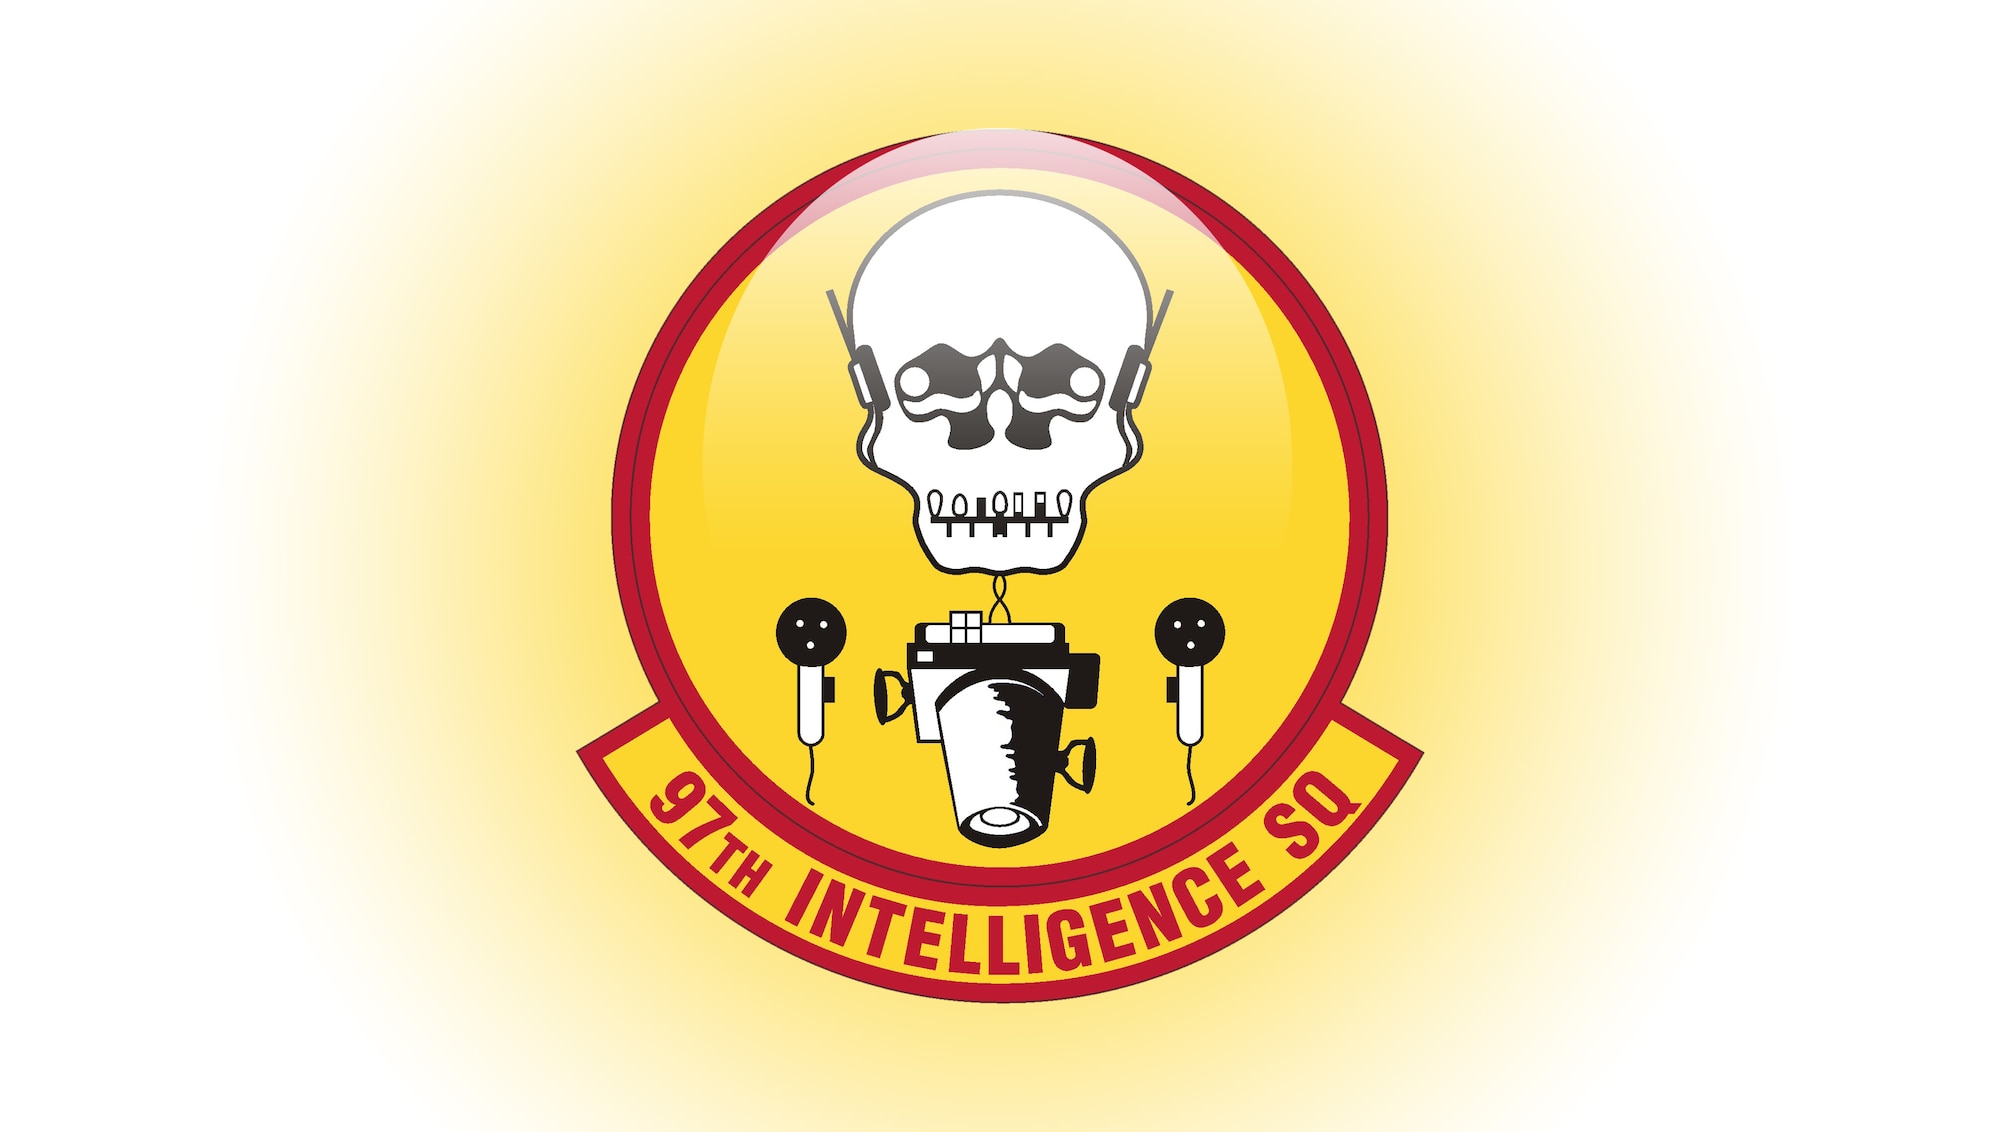 Digital patch of the 97th Intelligence Squadron.